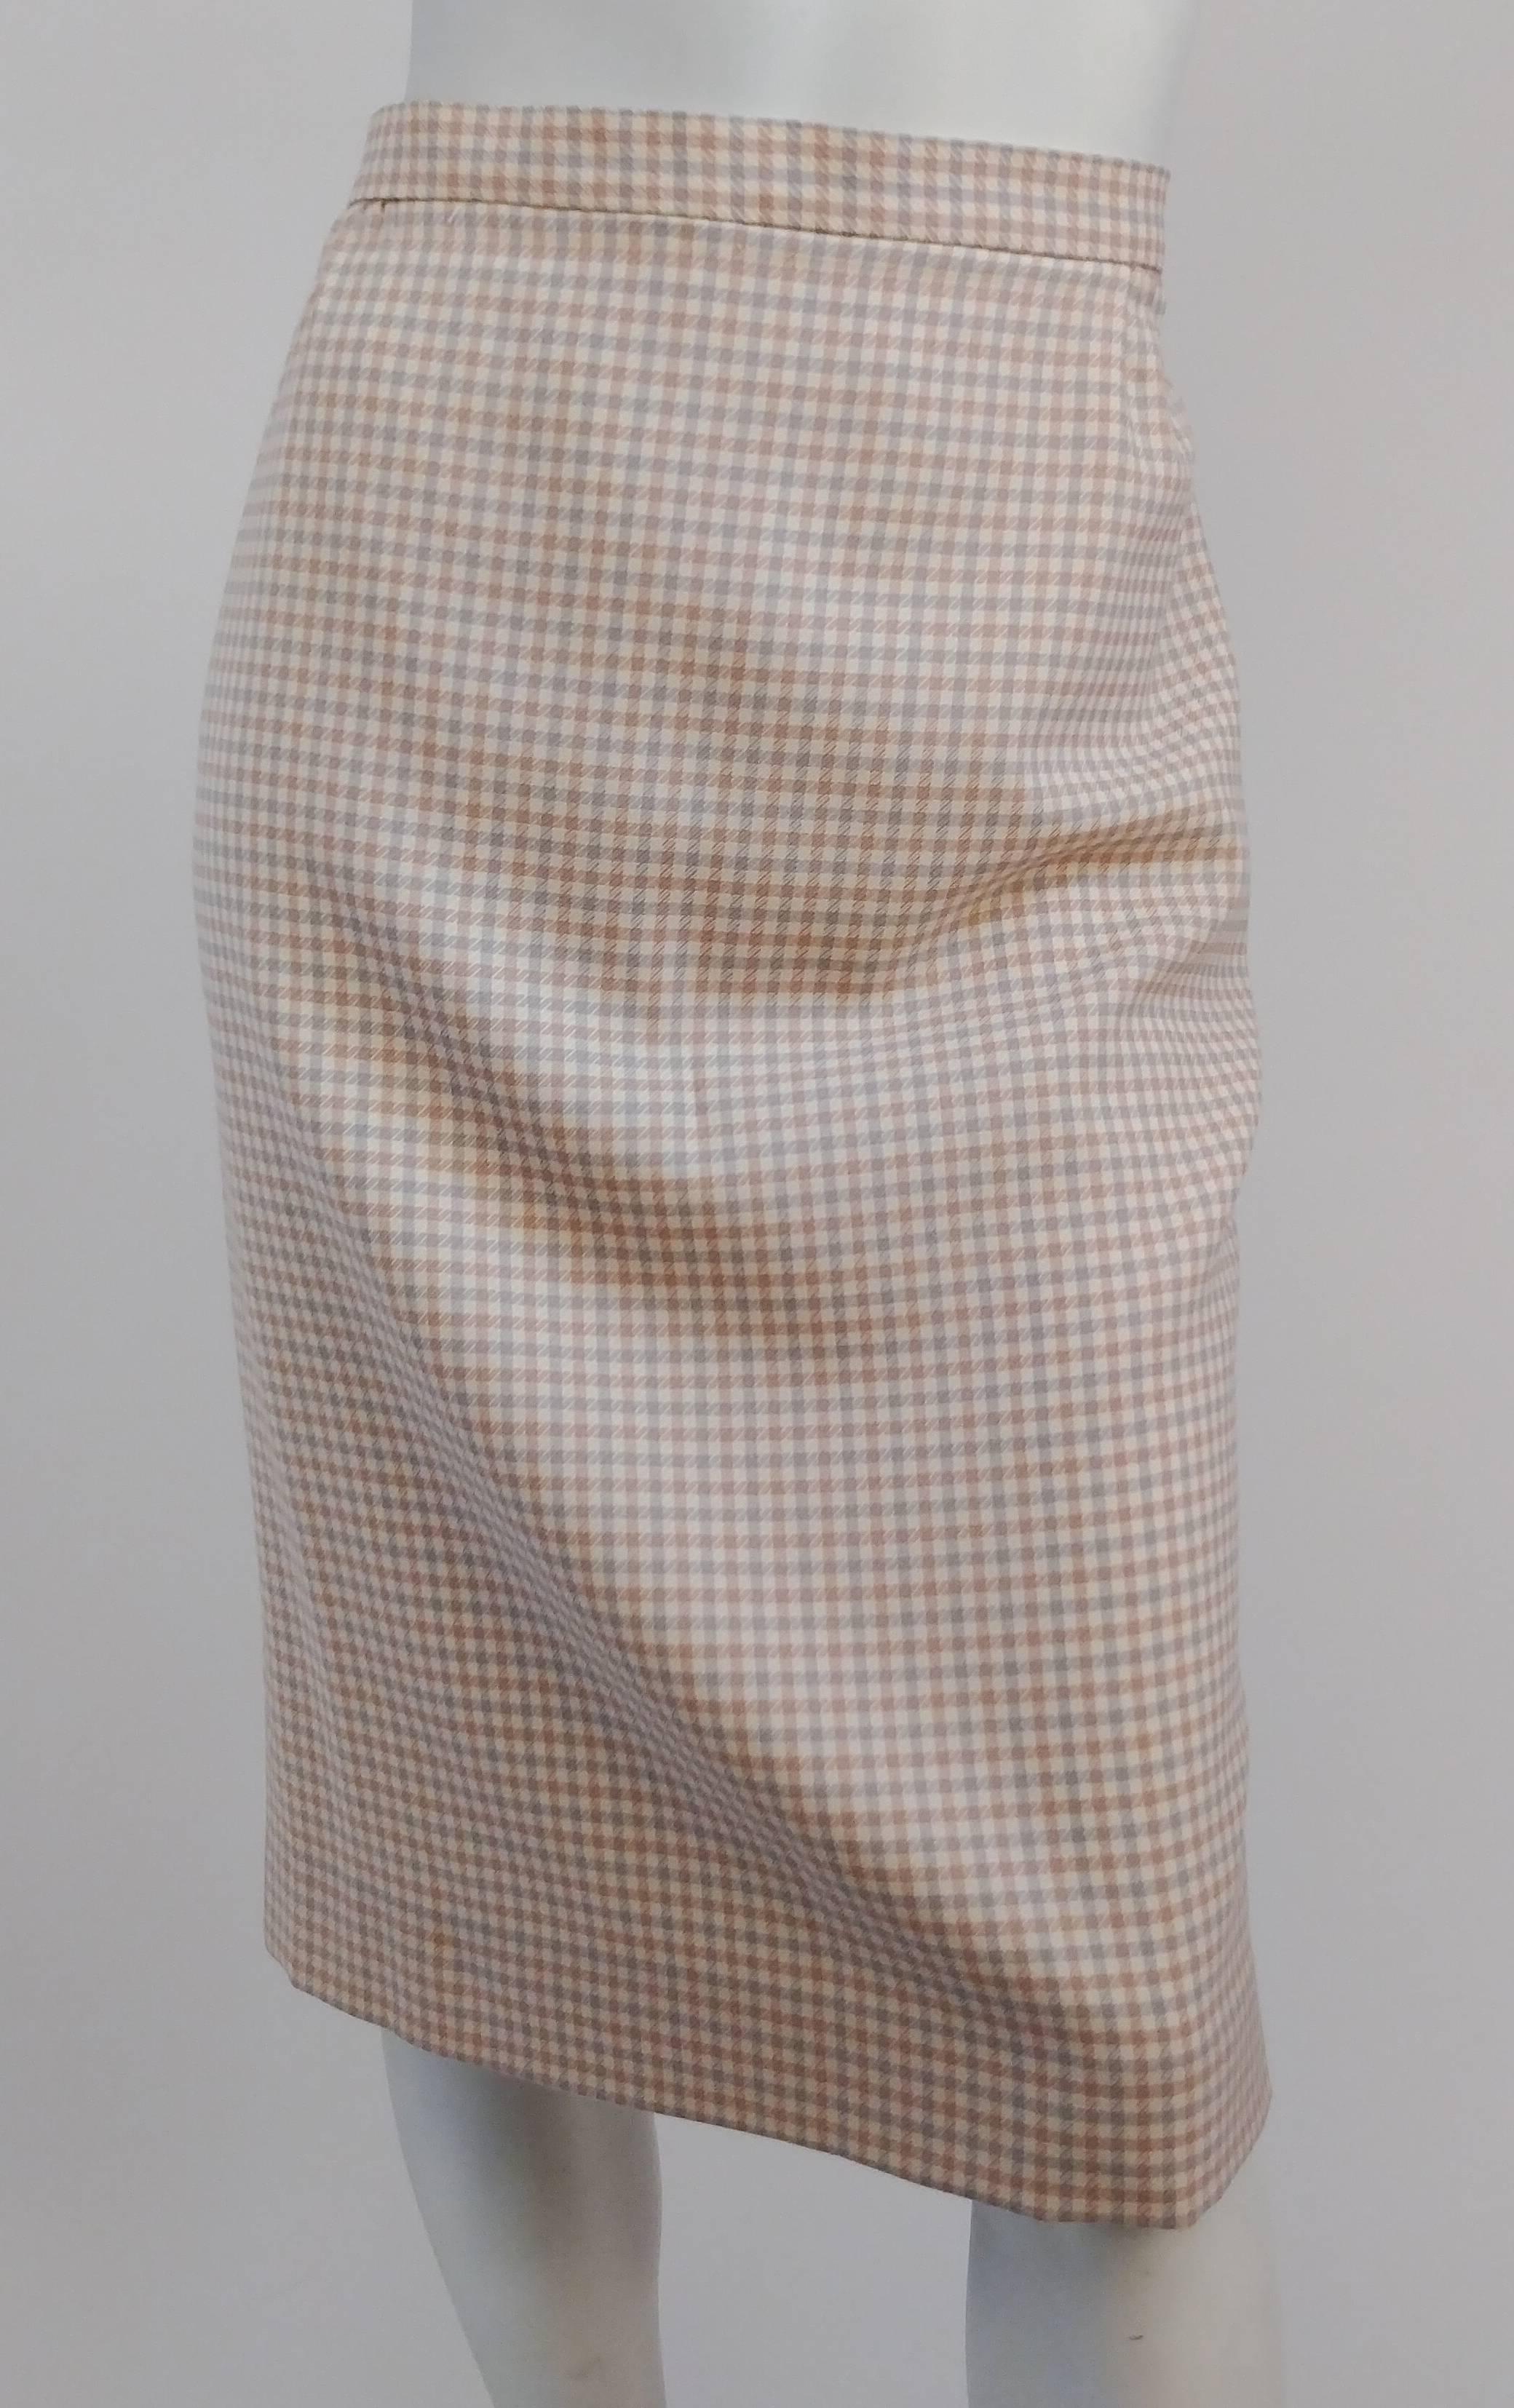 Women's 1980s Jaeger Two Piece Gingham Skirt Suit For Sale